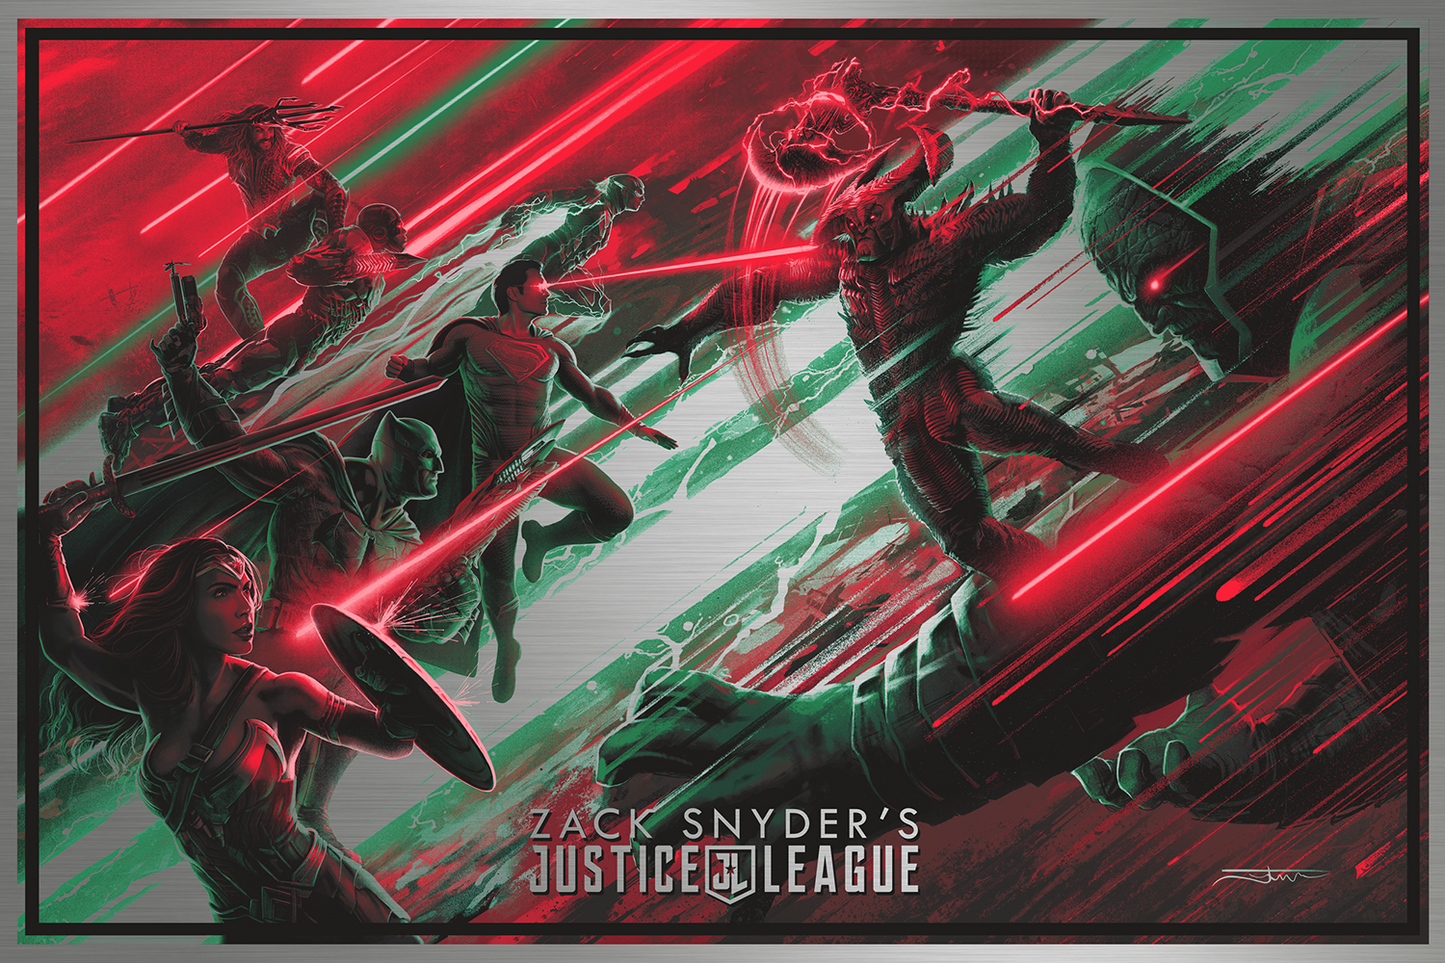 Juan Ramos "Zack Snyder's Justice League" Aluminum Print (Arriving end of June-Shipping Beg of July)